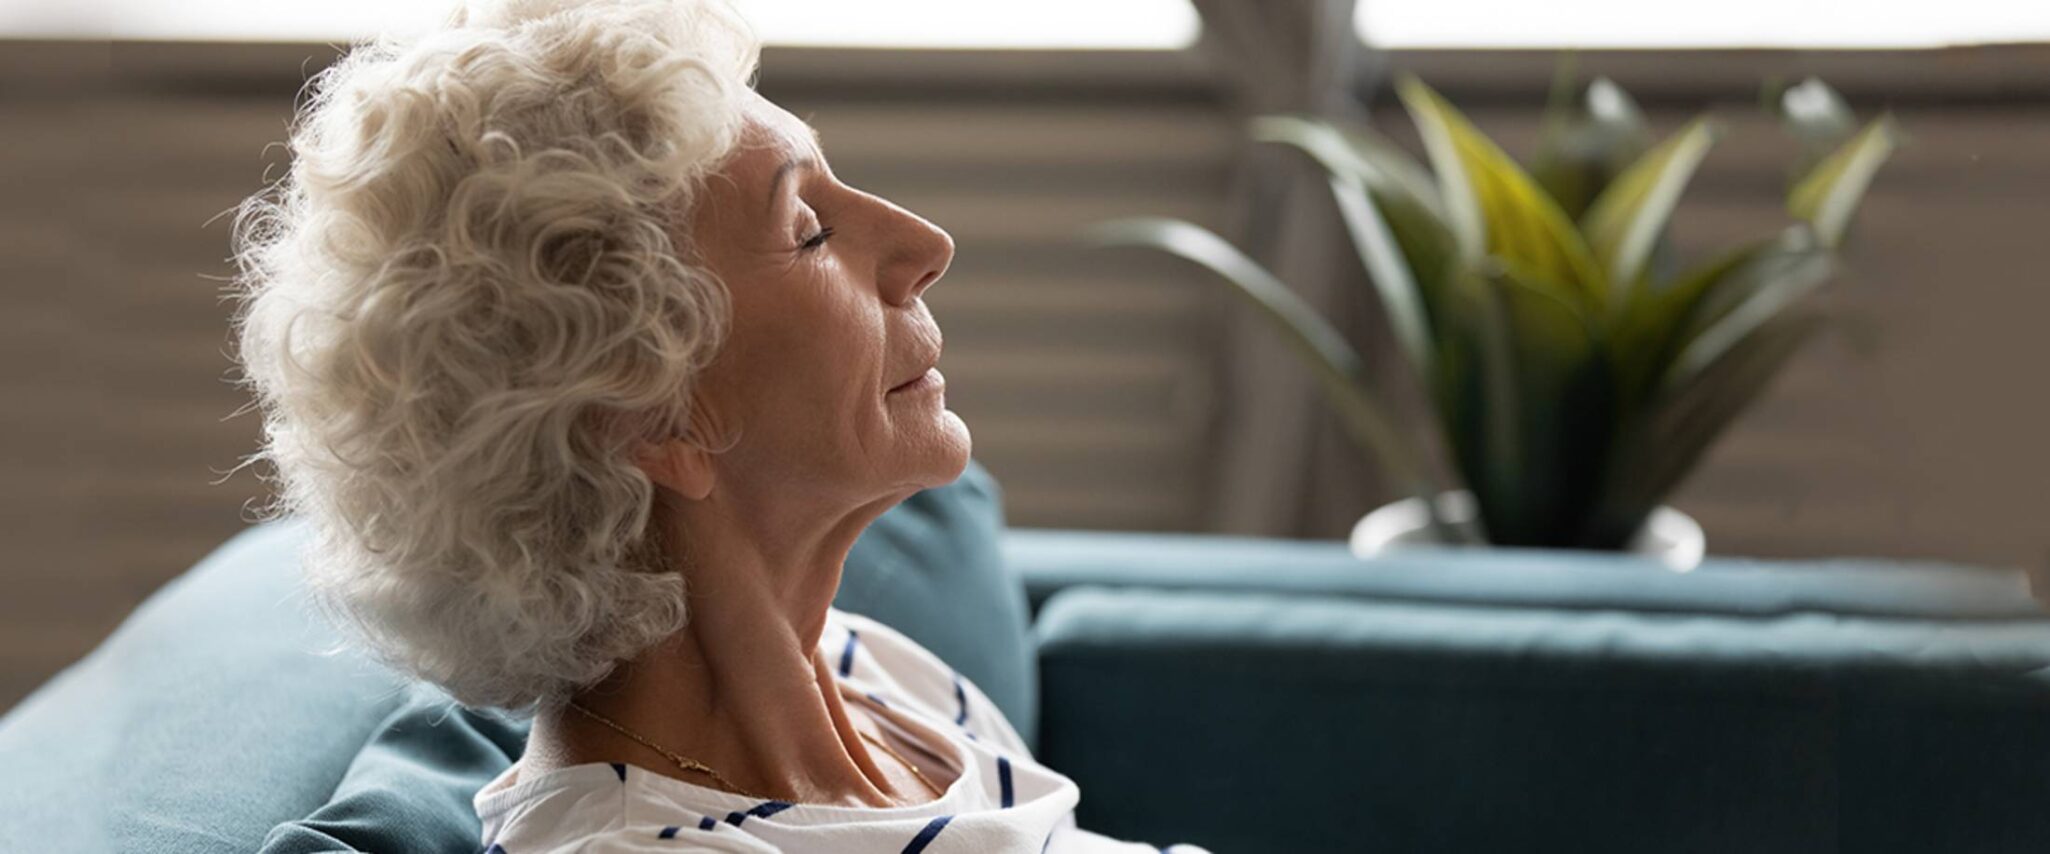 elderly woman sitting on a couch with her eyes closed